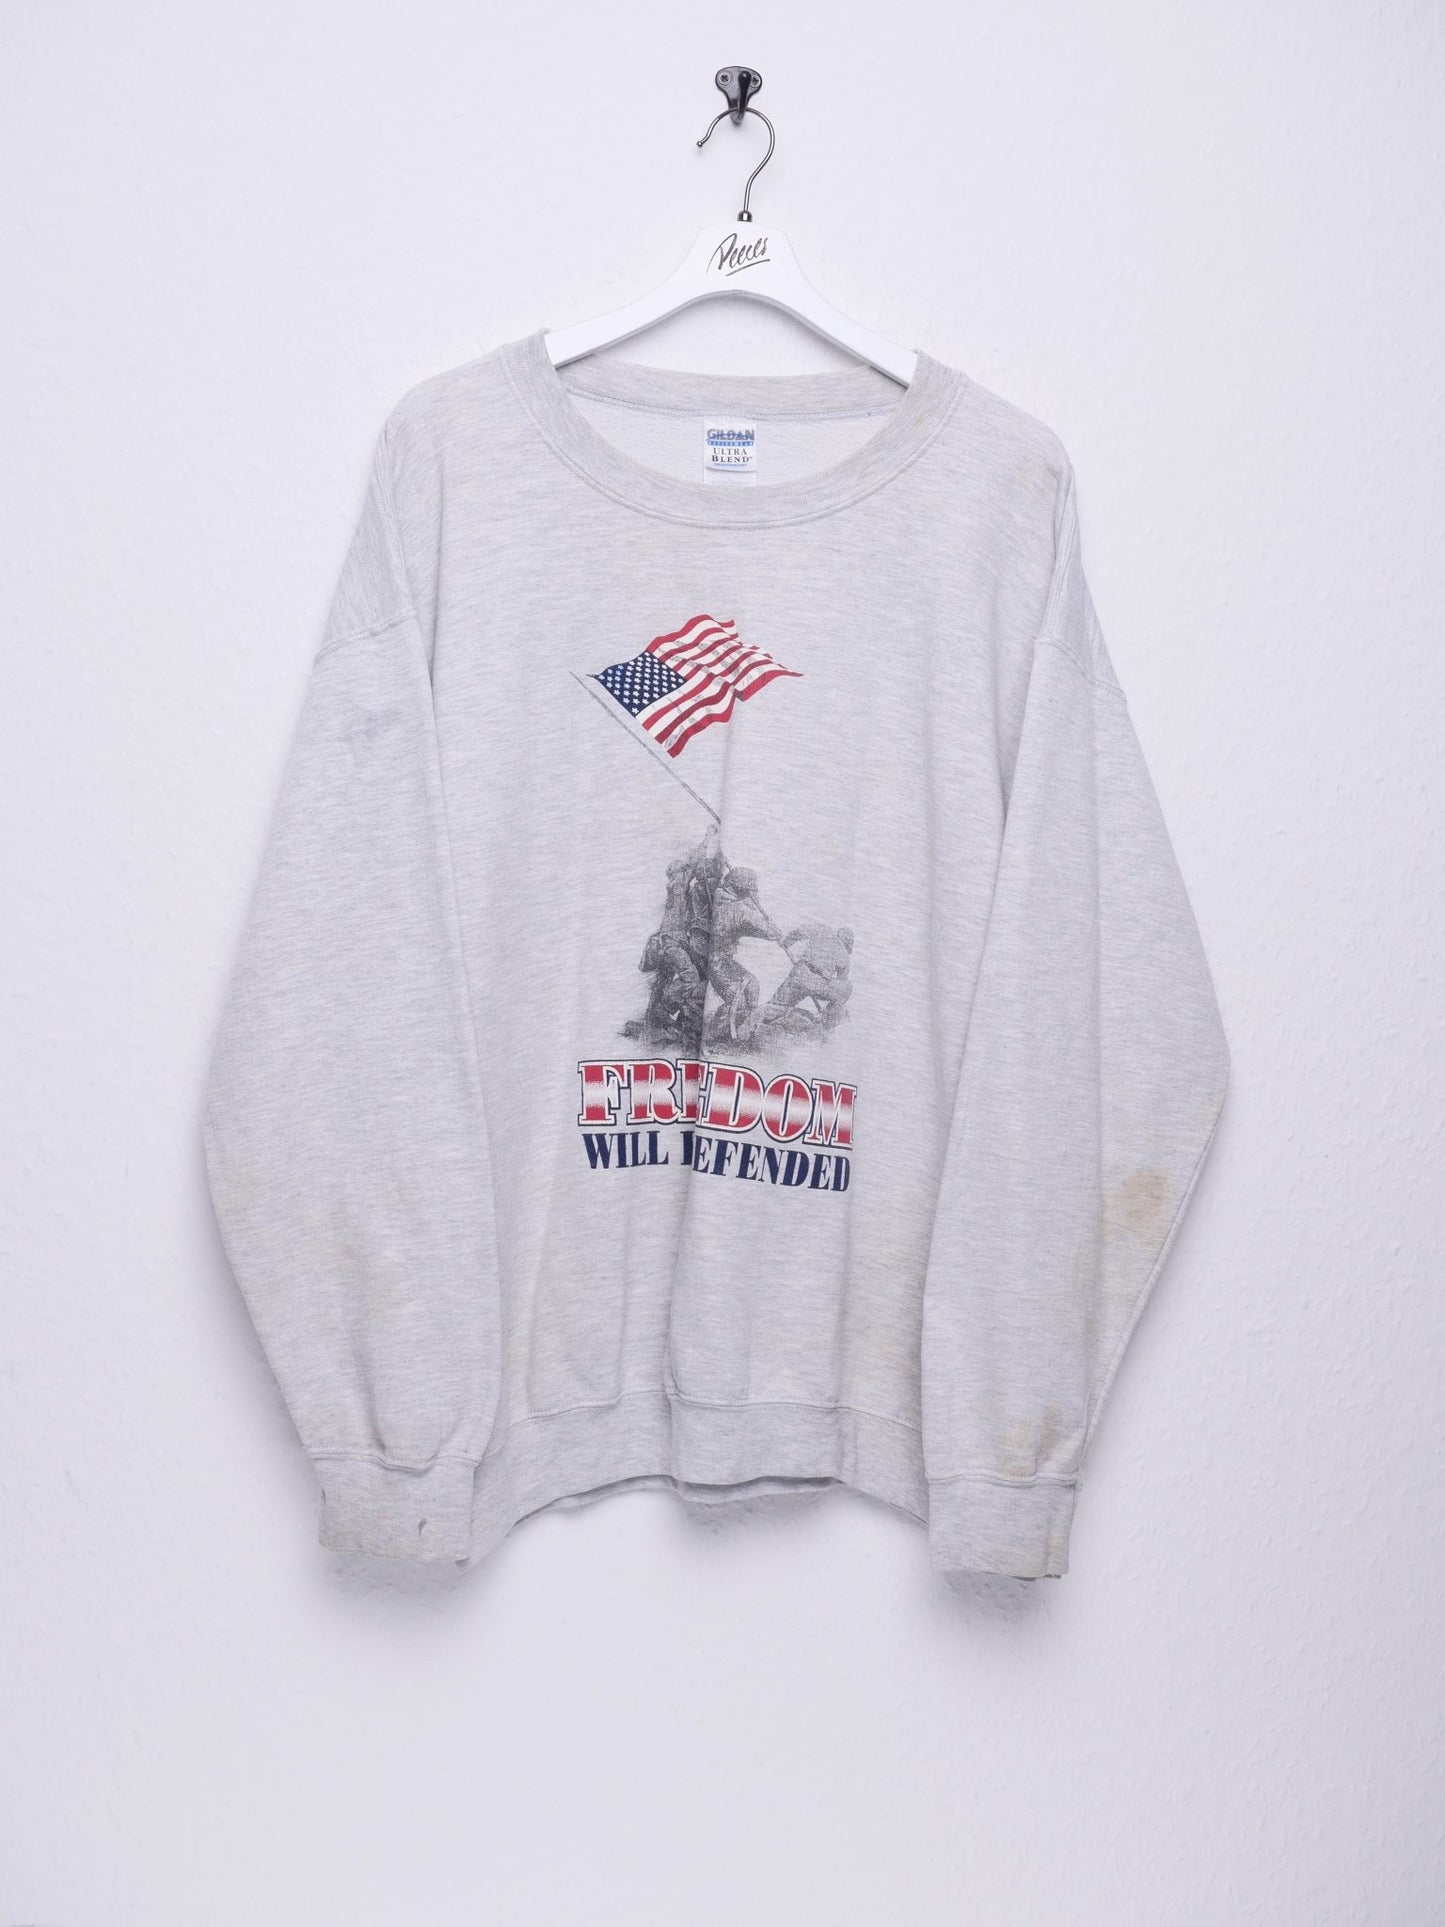 gildan Freedom Will Be Defendeded printed Spellout Vintage Sweater - Peeces